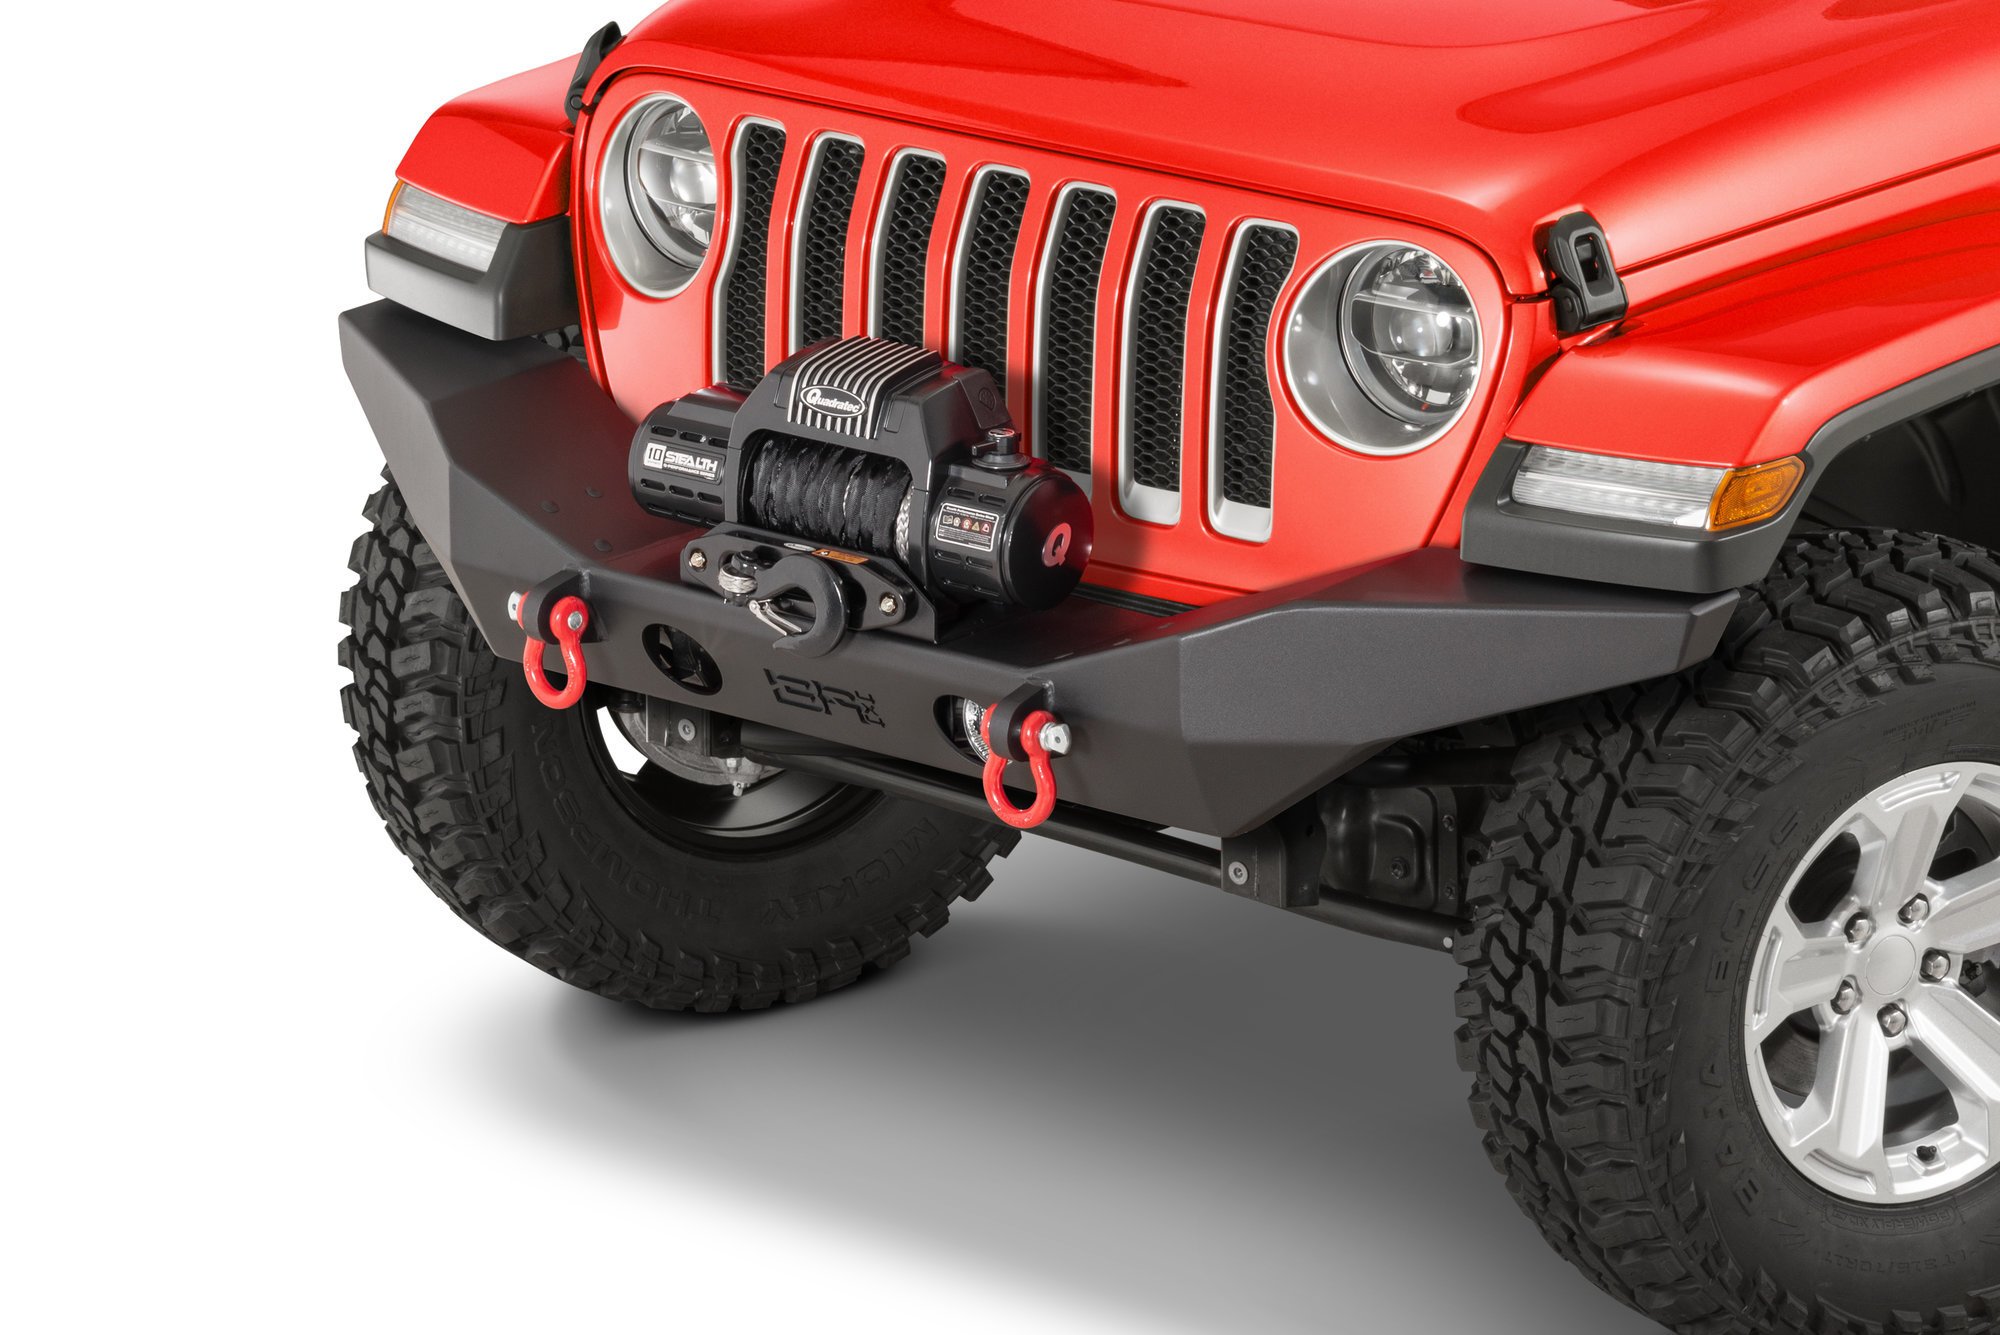 https://www.quadratec.com/sites/default/files/styles/product_zoomed/public/product_images/body-armor-19531-front-full-width-winch-bumper-jl-main.jpg